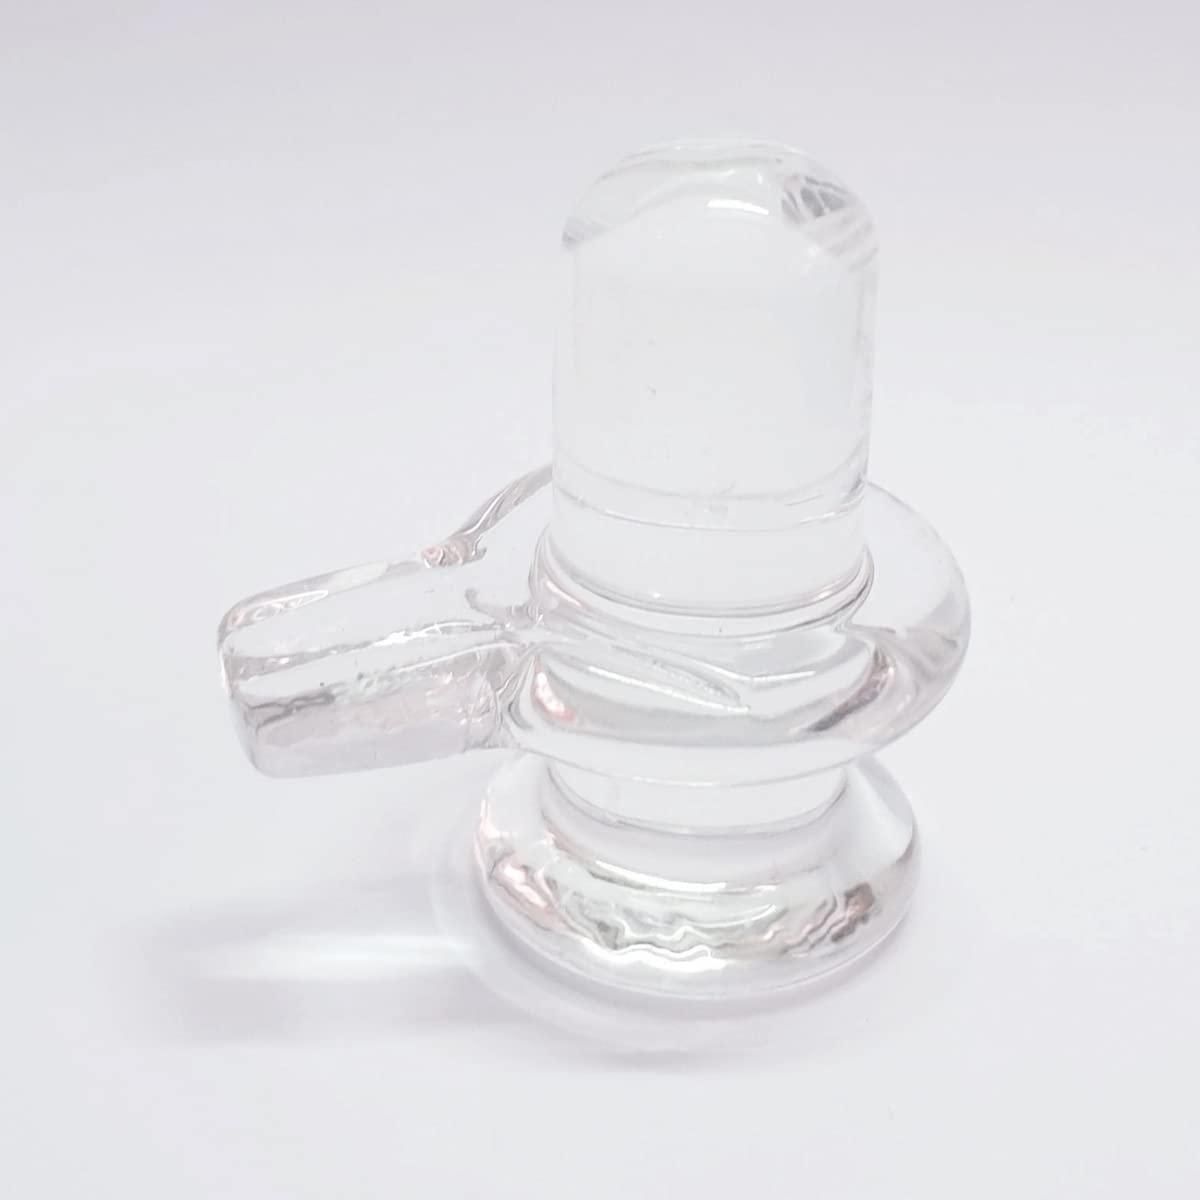 Sphatik Shivling/Big Size for Home Pooja Decorative Showpiece - 4 inch, 20gm (Crystal, White) - Deal IND.